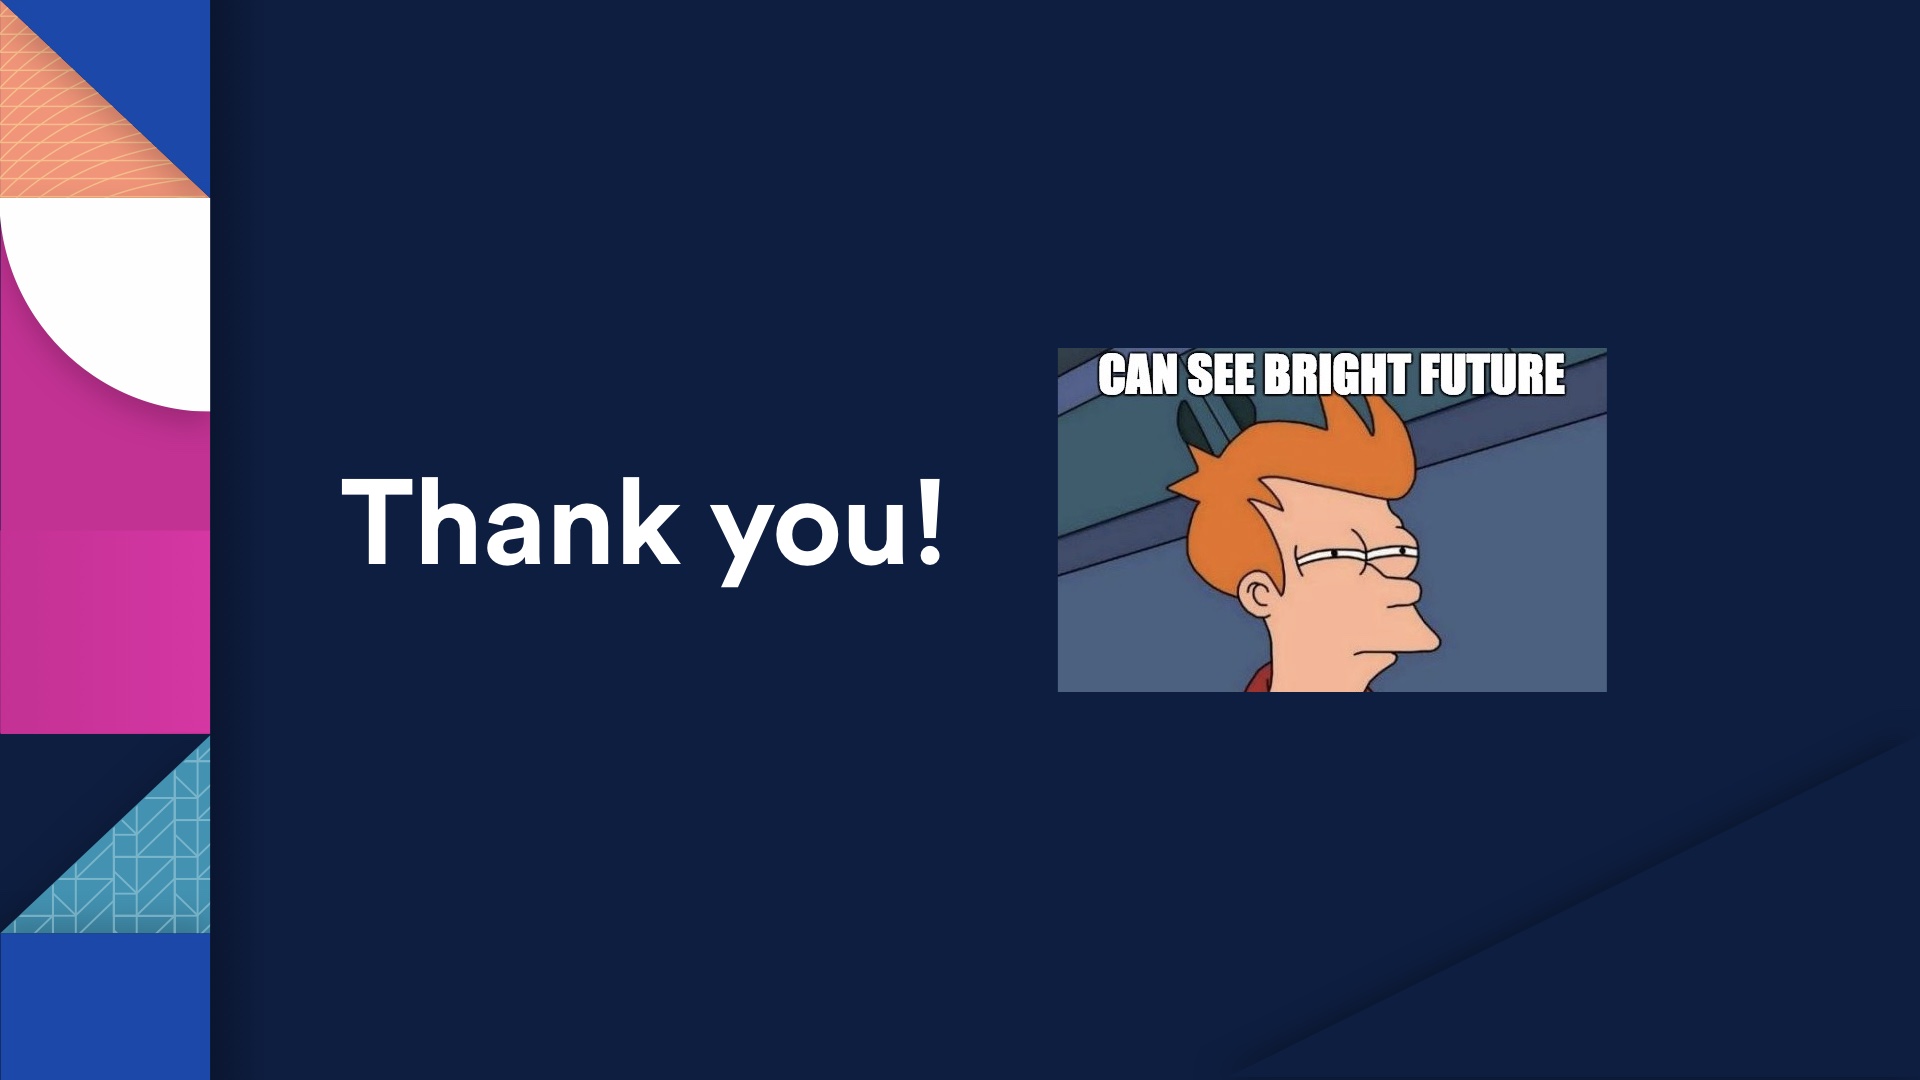 Slide image: Thank you, image of Simpson's character squinting, Can see bright future